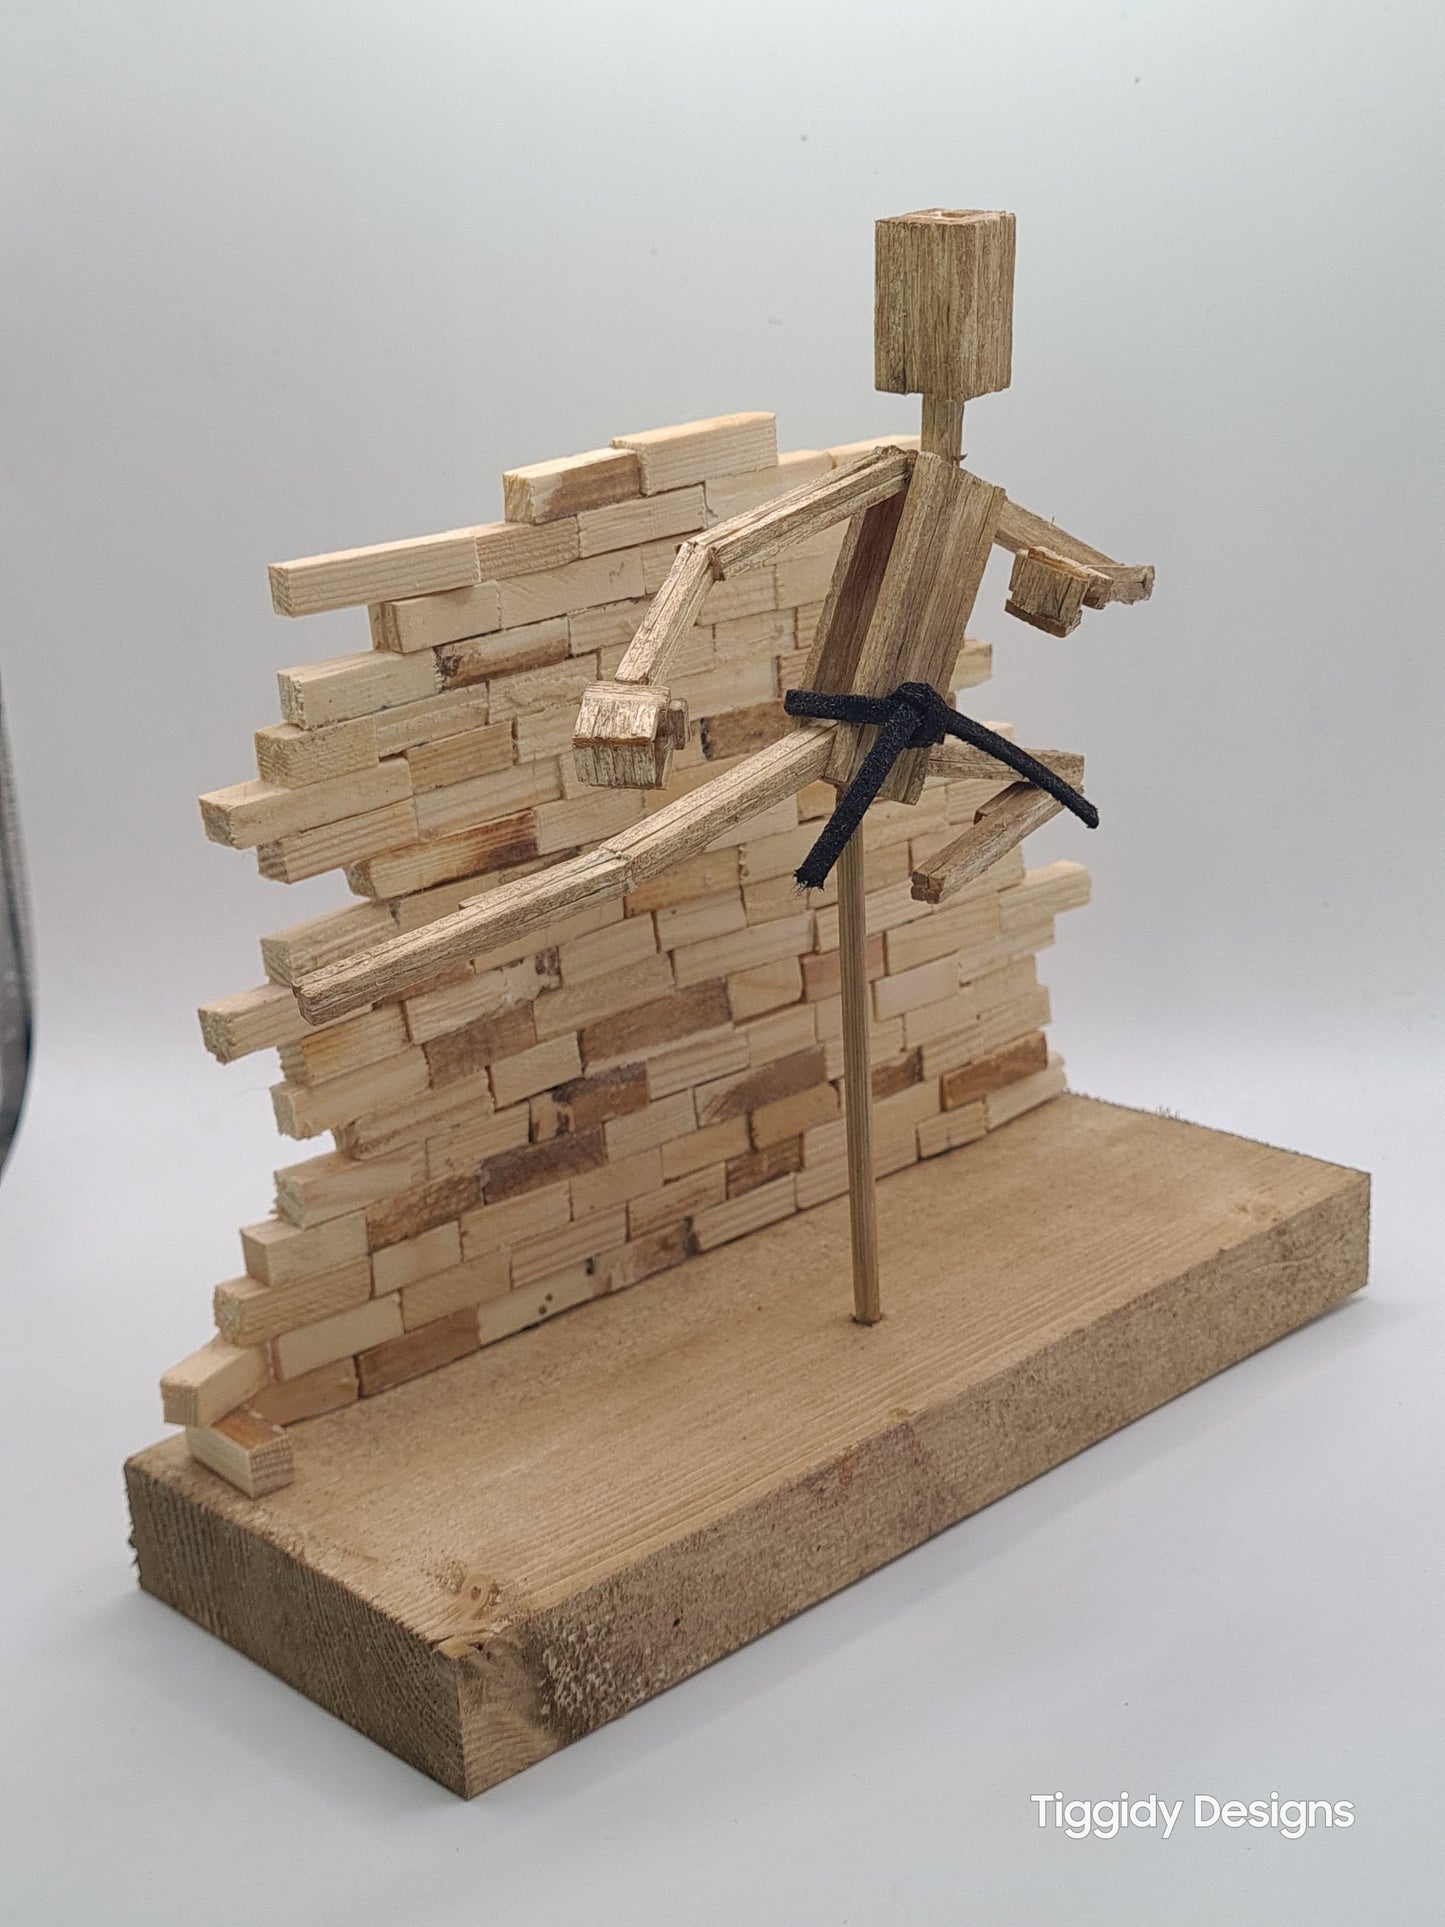 Flying Kick - Handcrafted Wooden Matchstick Figures - Gifts, Ornaments and Decor By Tiggidy Designs